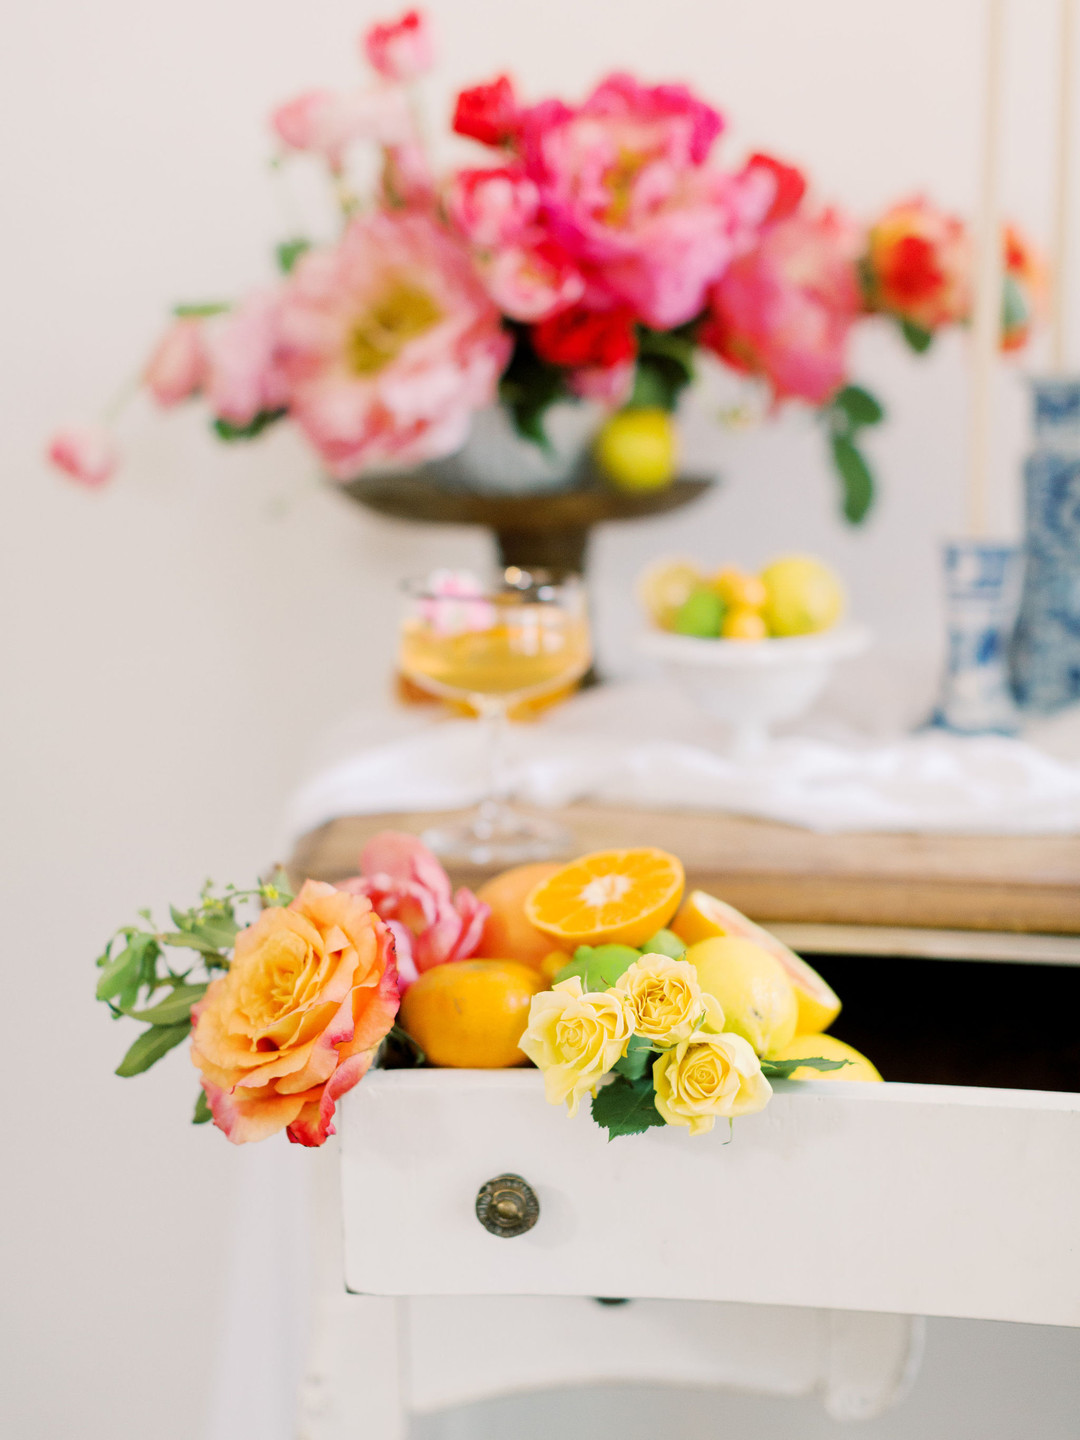 Summer citrus wedding inspiration at historic post office LGBTQ+ weddings two grooms gay wedding blue suit white gray suit orange blue bright colorful summery styled shoot